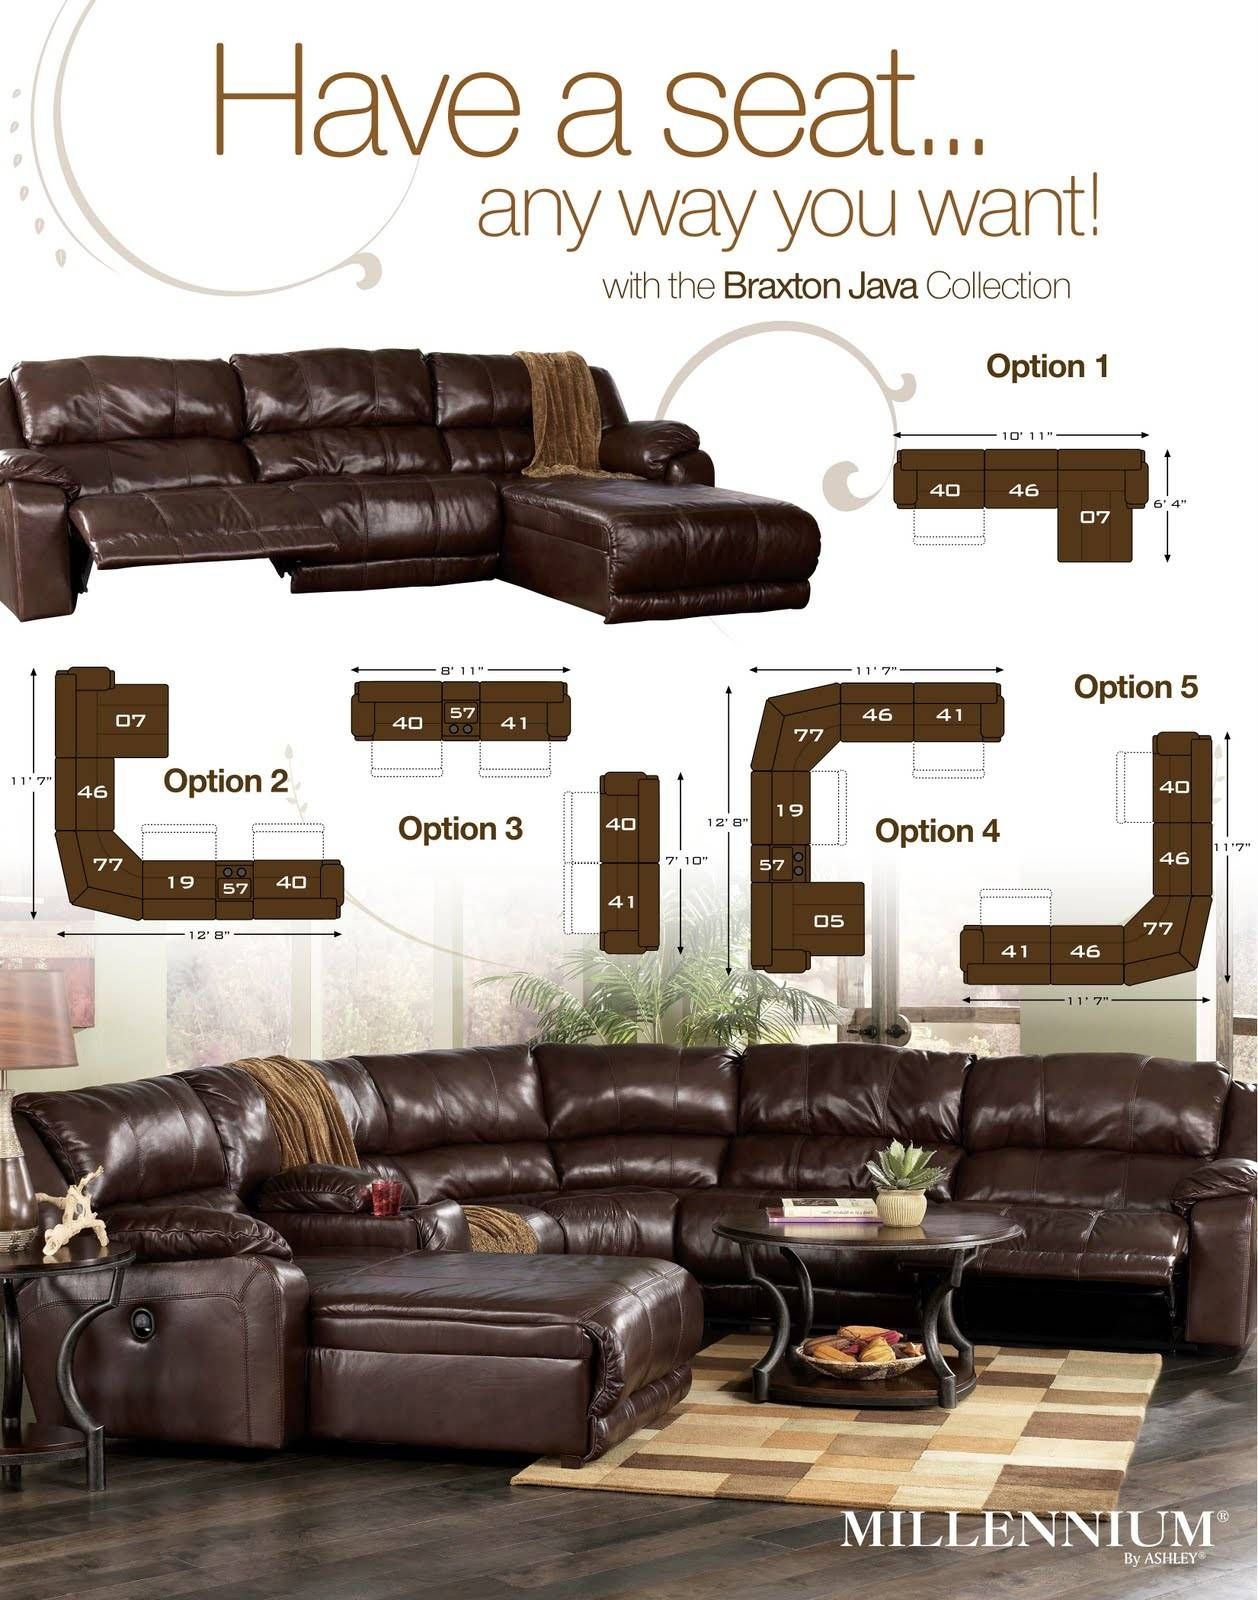 Braxton Java Sectional Review: Ashley Furniture At Furniturecart | Throughout Braxton Sectional Sofa (View 1 of 30)